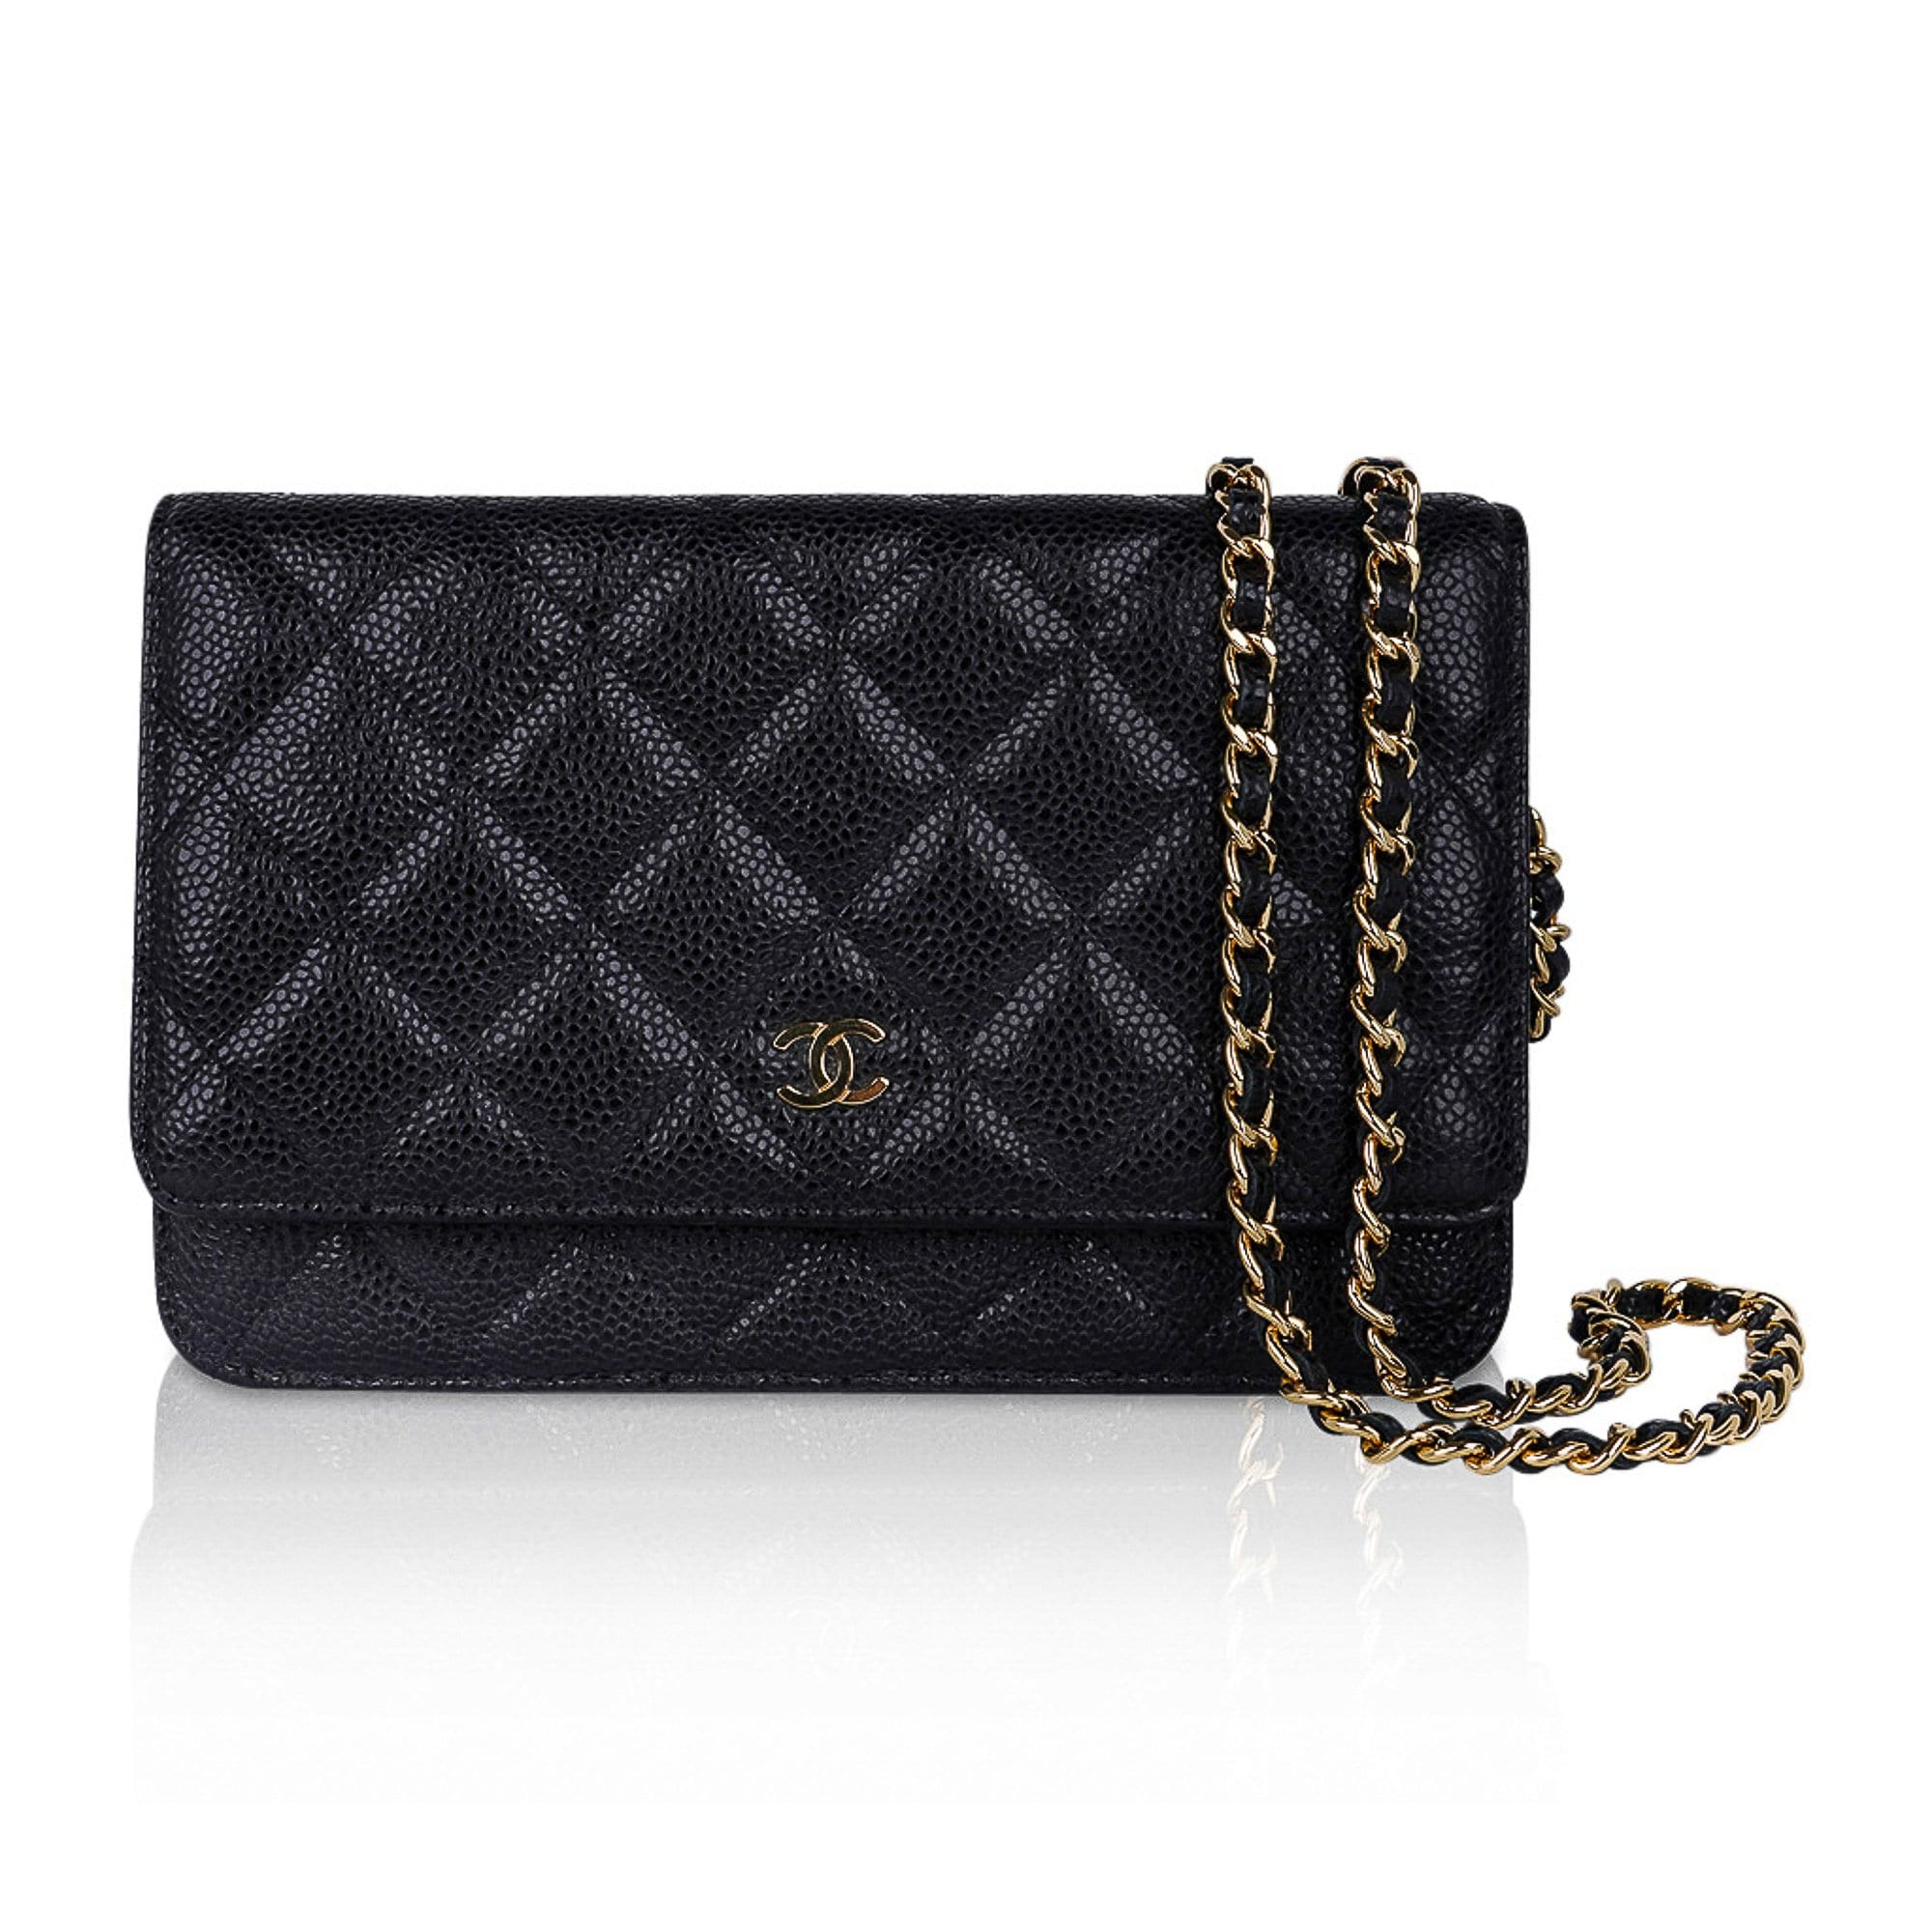 Chanel Vintage Wallet on Chain Caviar